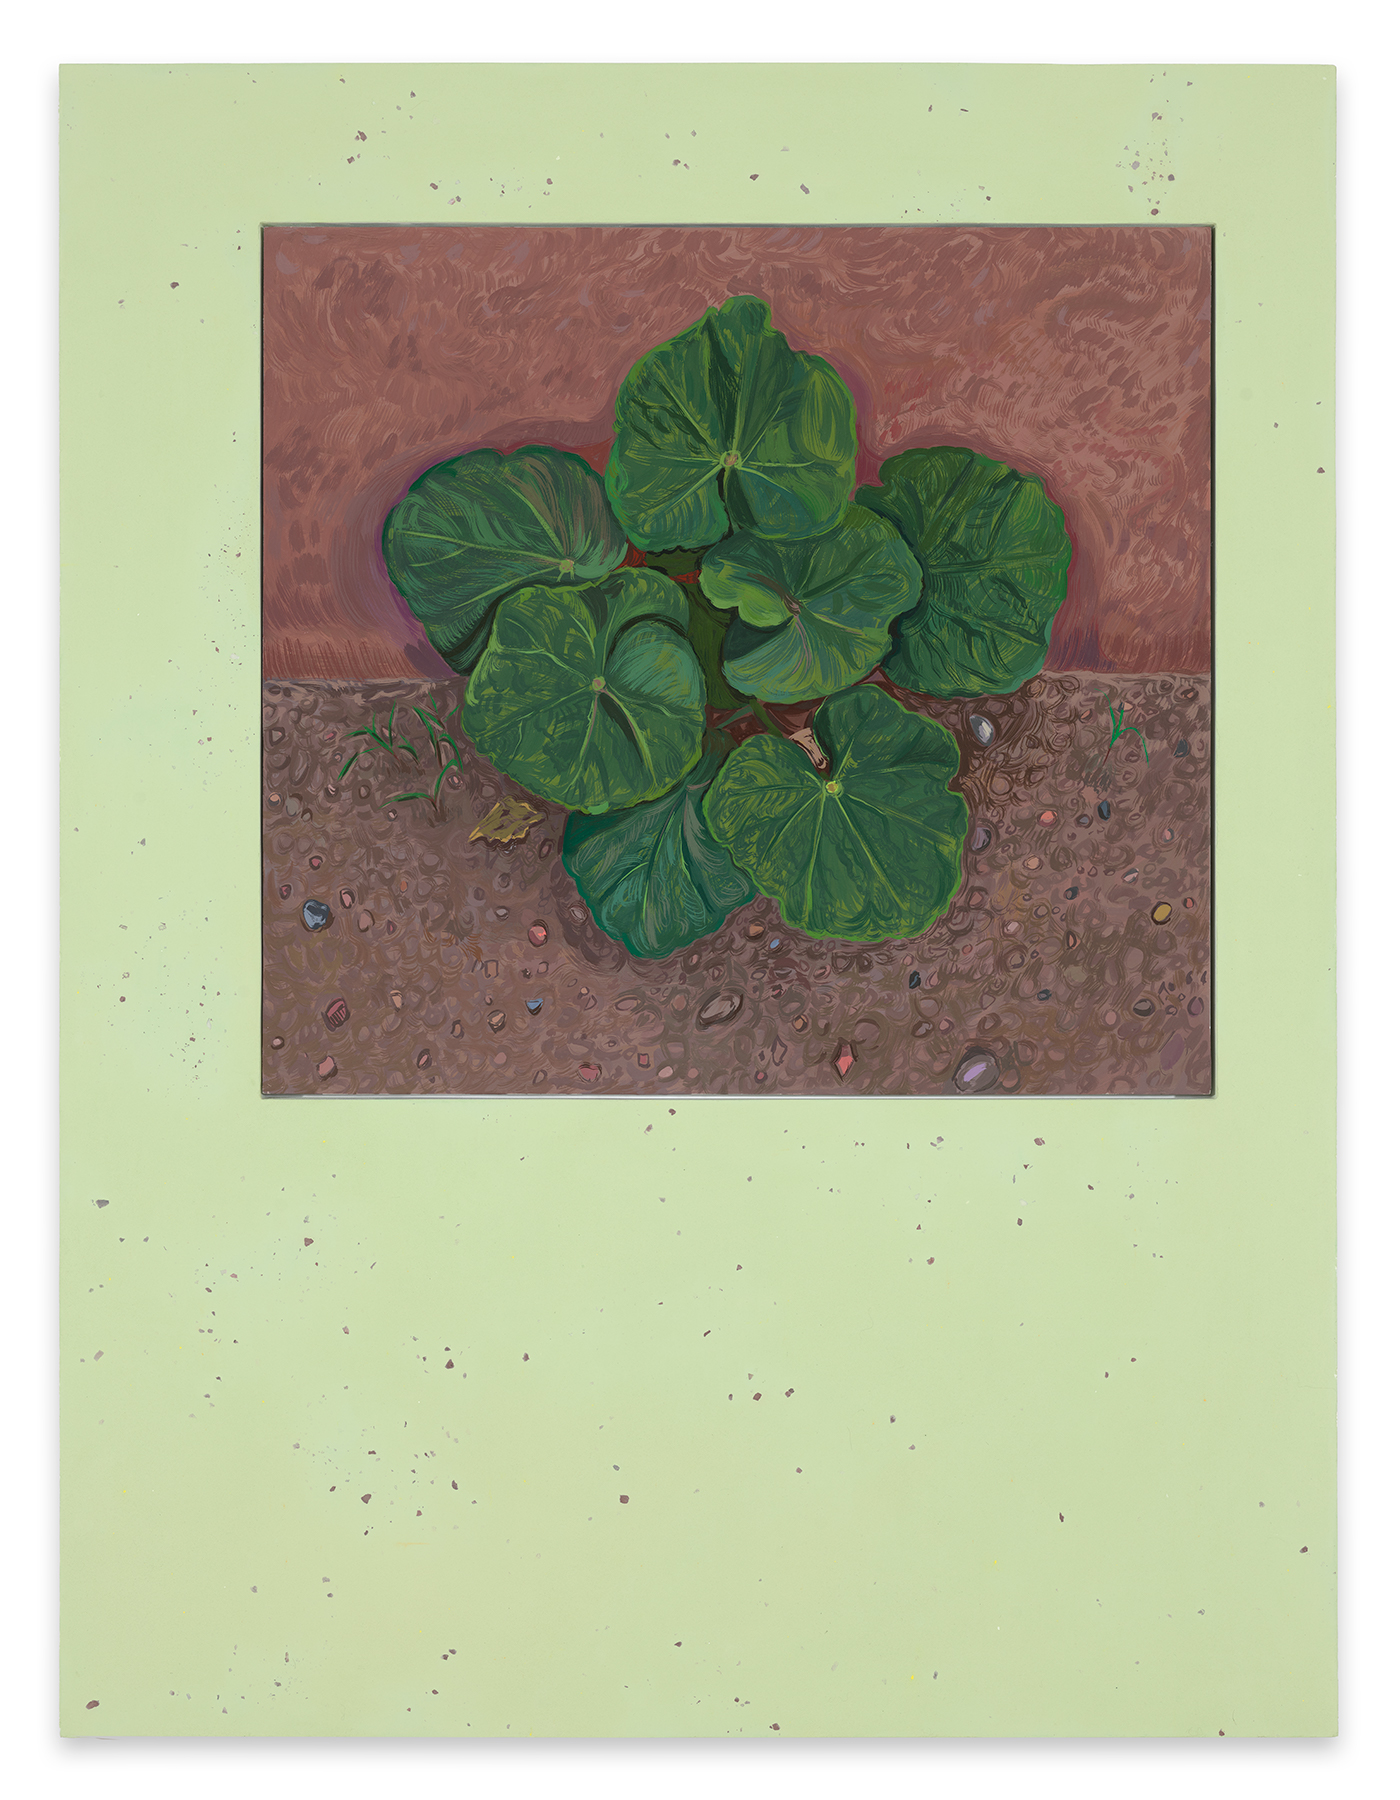 This image shows a painting which is framed in a pigmented pastel green panel that includes fragments of earth and rocks from the sites where the paintings were made.  The subject of the painting is a cluster of rounded fan-shaped green and yellow and blue hollyhock leaves growing between the intersection of the adobe wall and the ground.  The wall and the soil come together as two flat planes separated by the short textural staccato and curved Monet-like brushstrokes in mauve, beige, red, brown and purple to define the wall.   The parched soil is composed of energetic circular strokes of brown, gray and mauve with scattered jewel-colored little stones of pink, purple, yellow ochre with a few green sprouts popping through - which somehow gives the illusion of peering at pebbles through water.